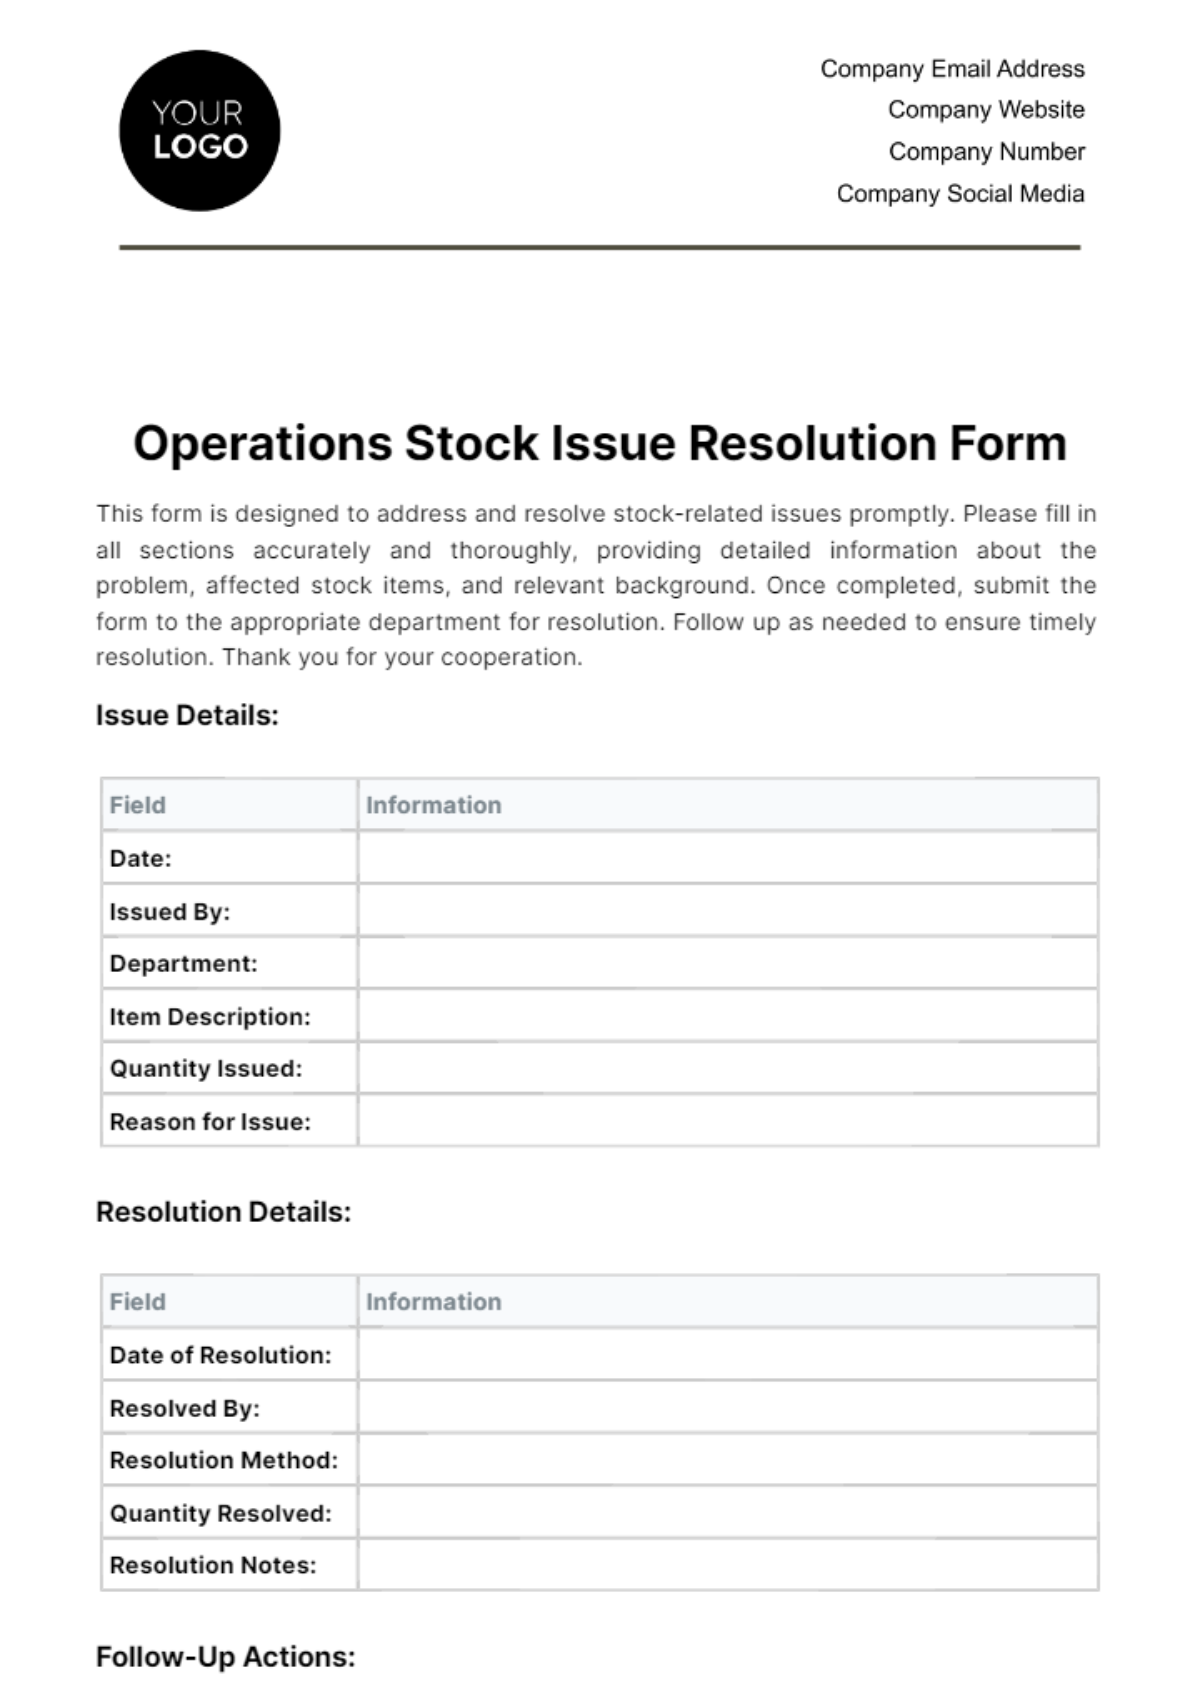 Operations Stock Issue Resolution Form Template